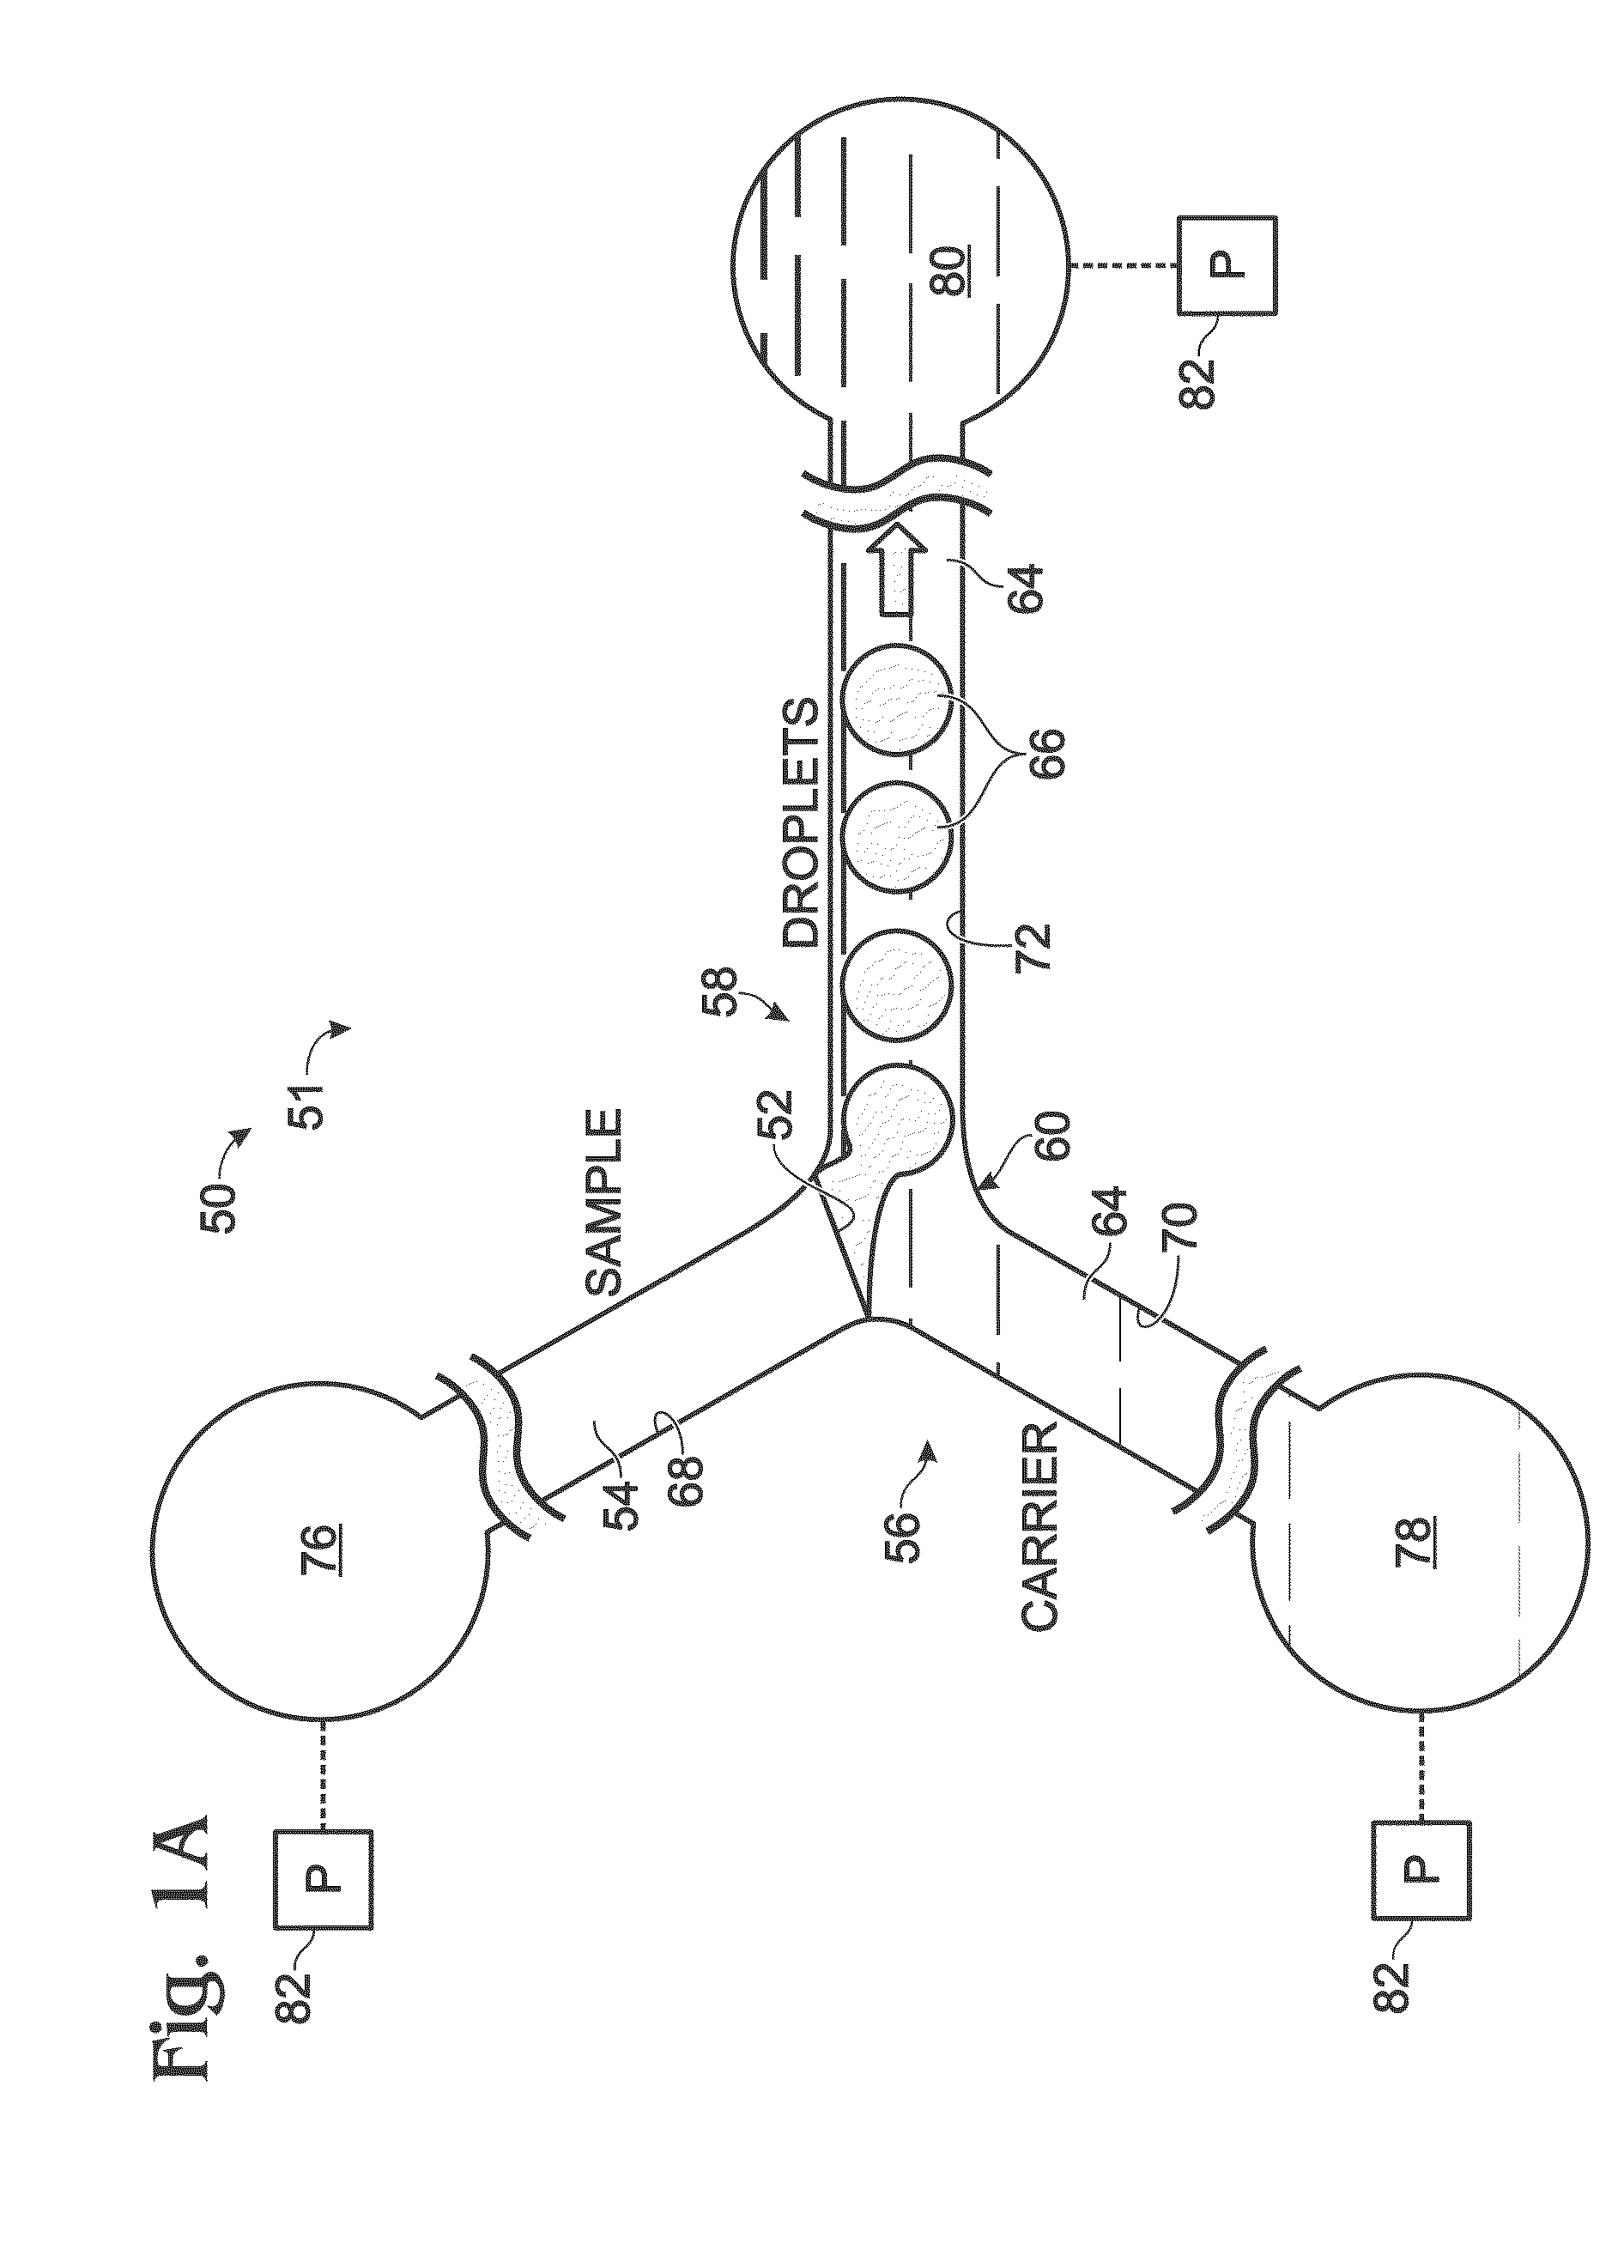 Droplet generation system with features for sample positioning